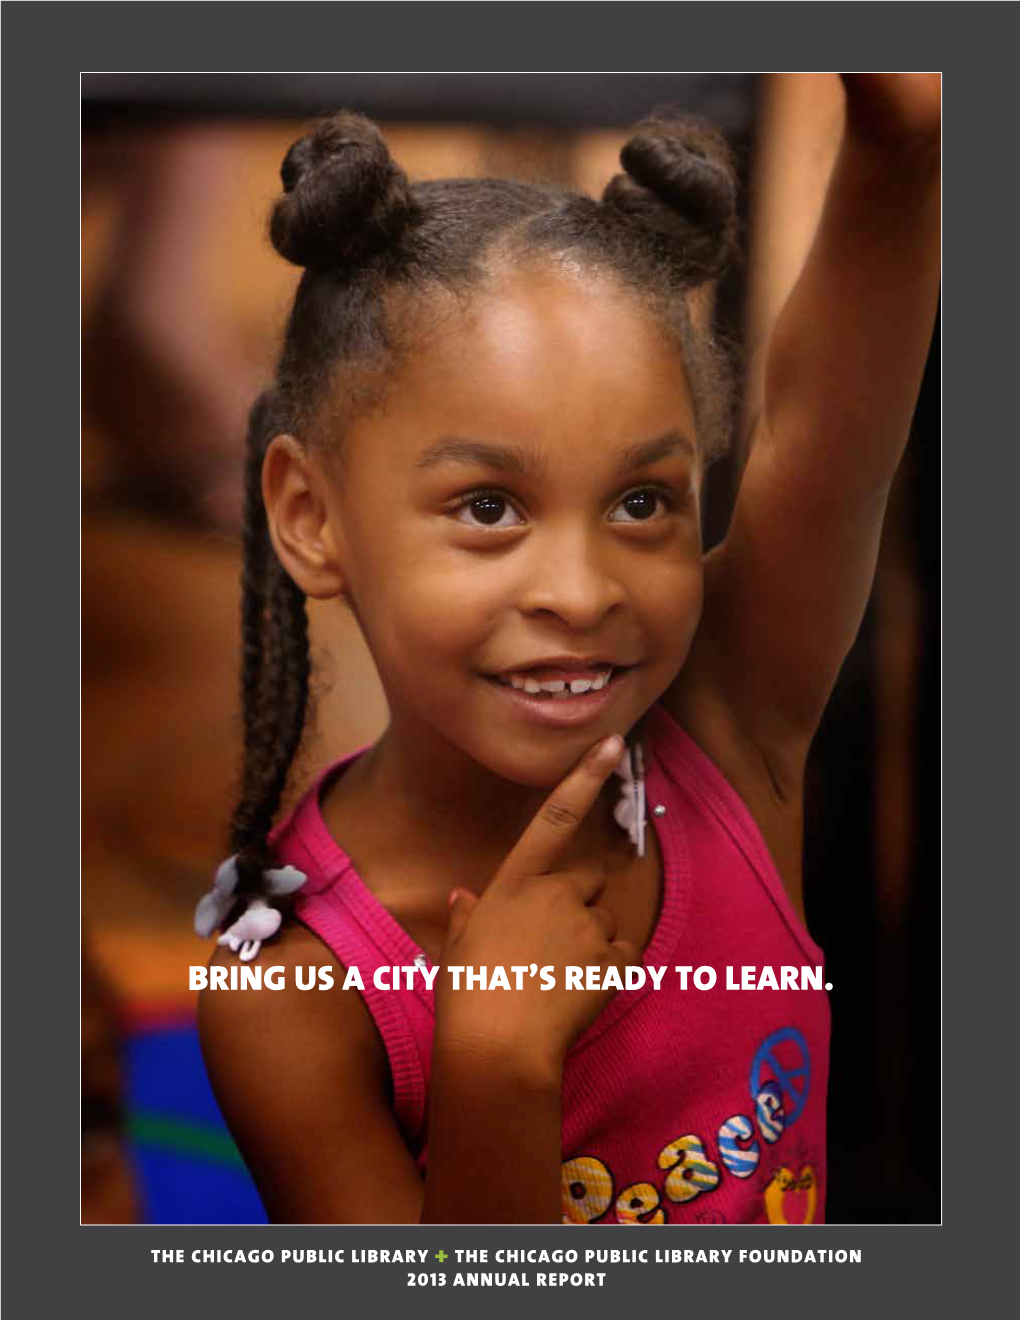 Bring Us a City That's Ready to Learn